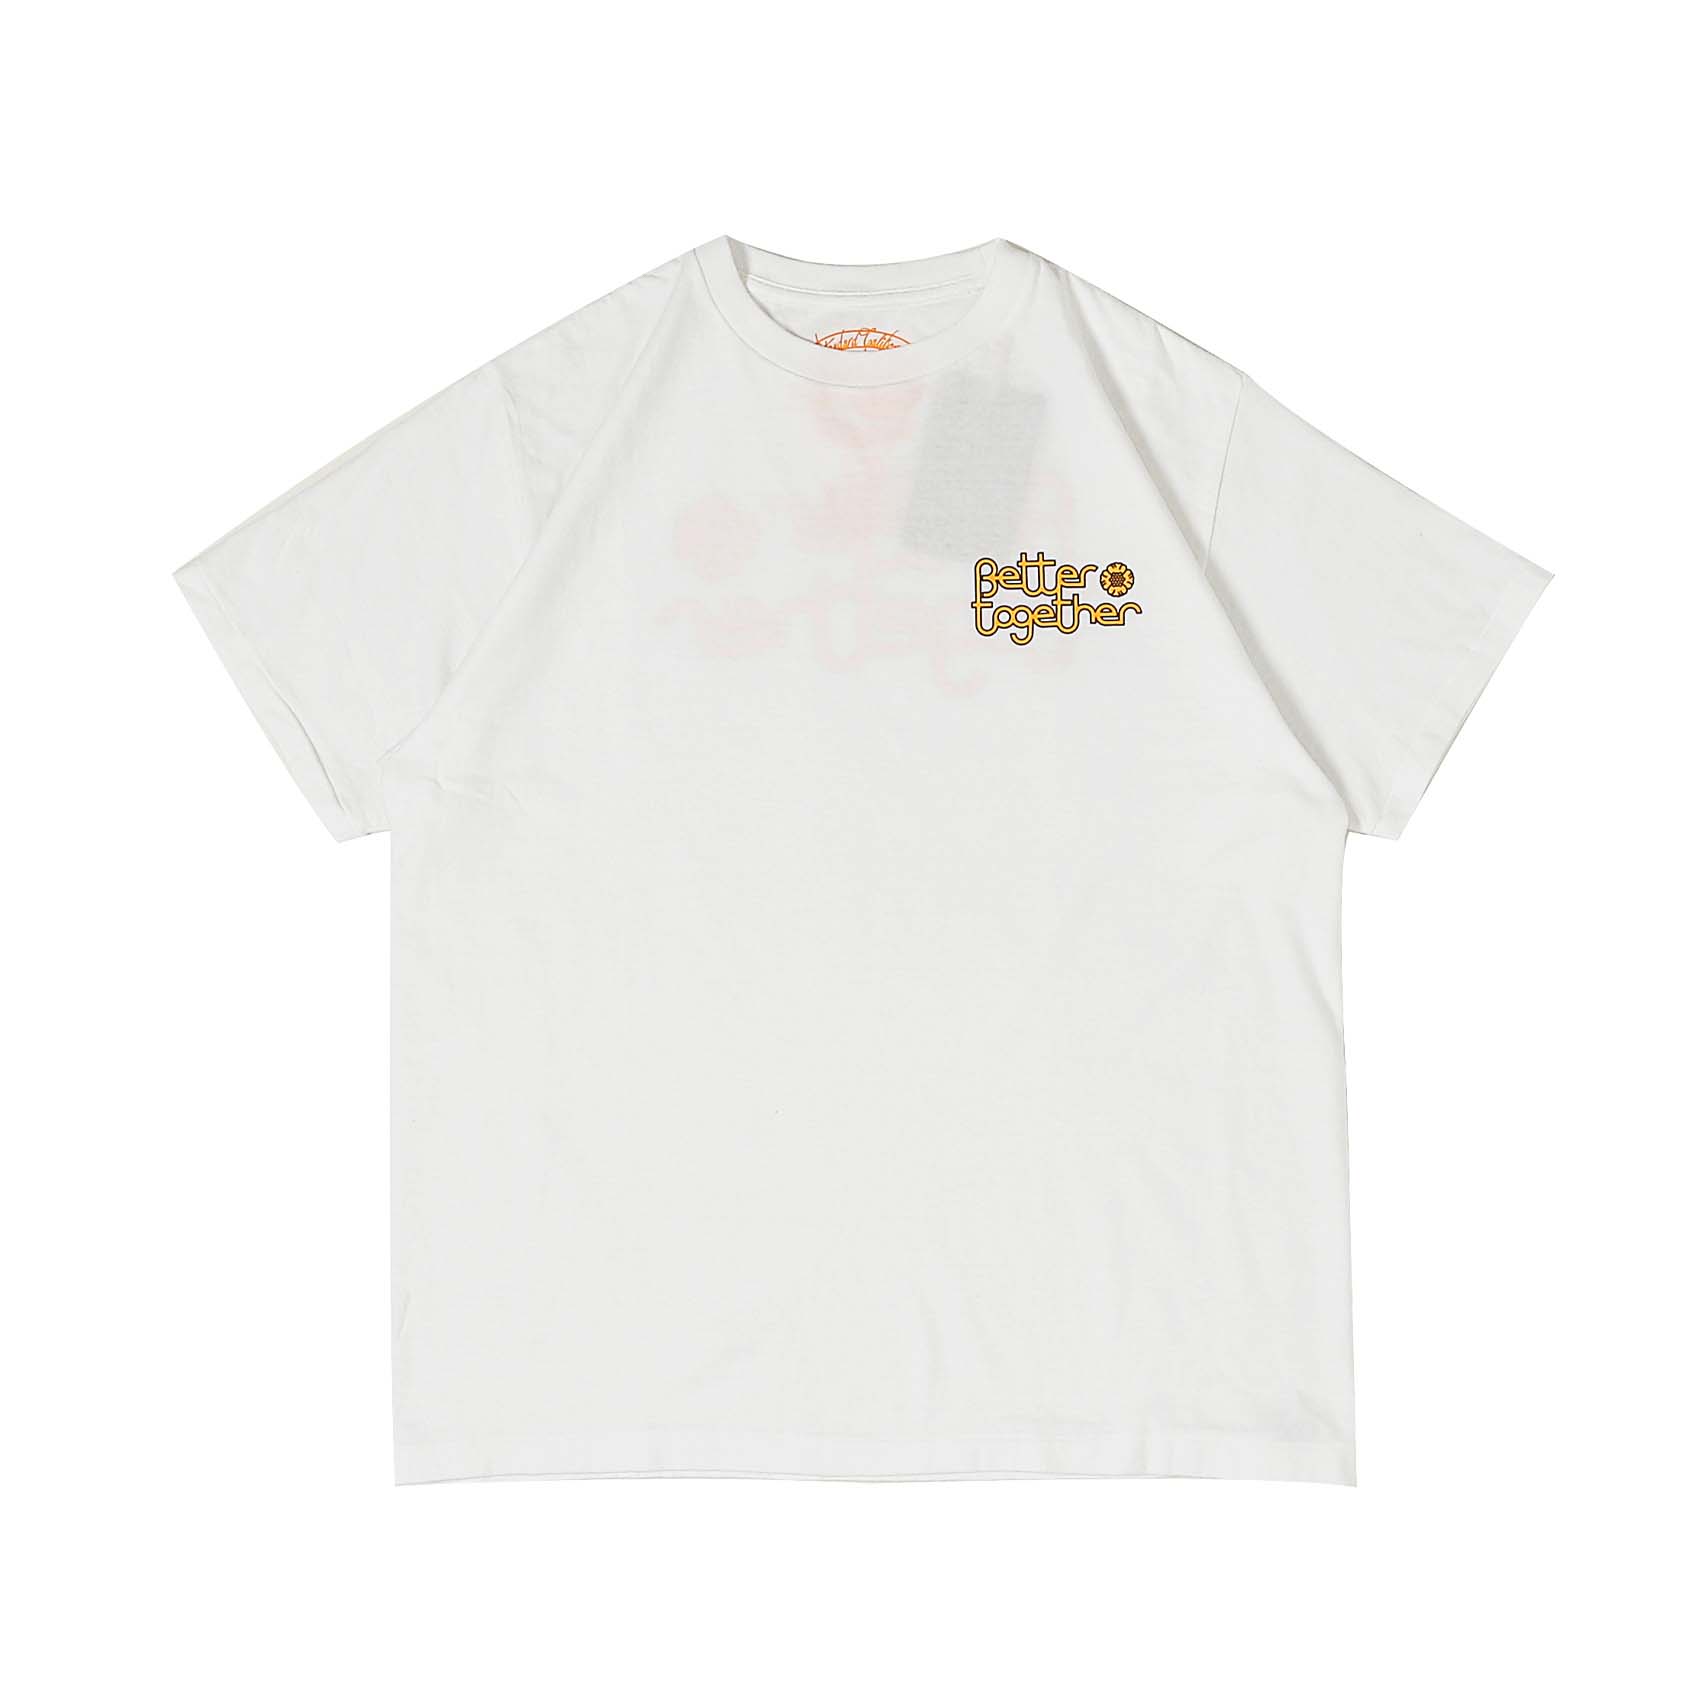 BETTER TOGETHER S/S TEE - WHITE